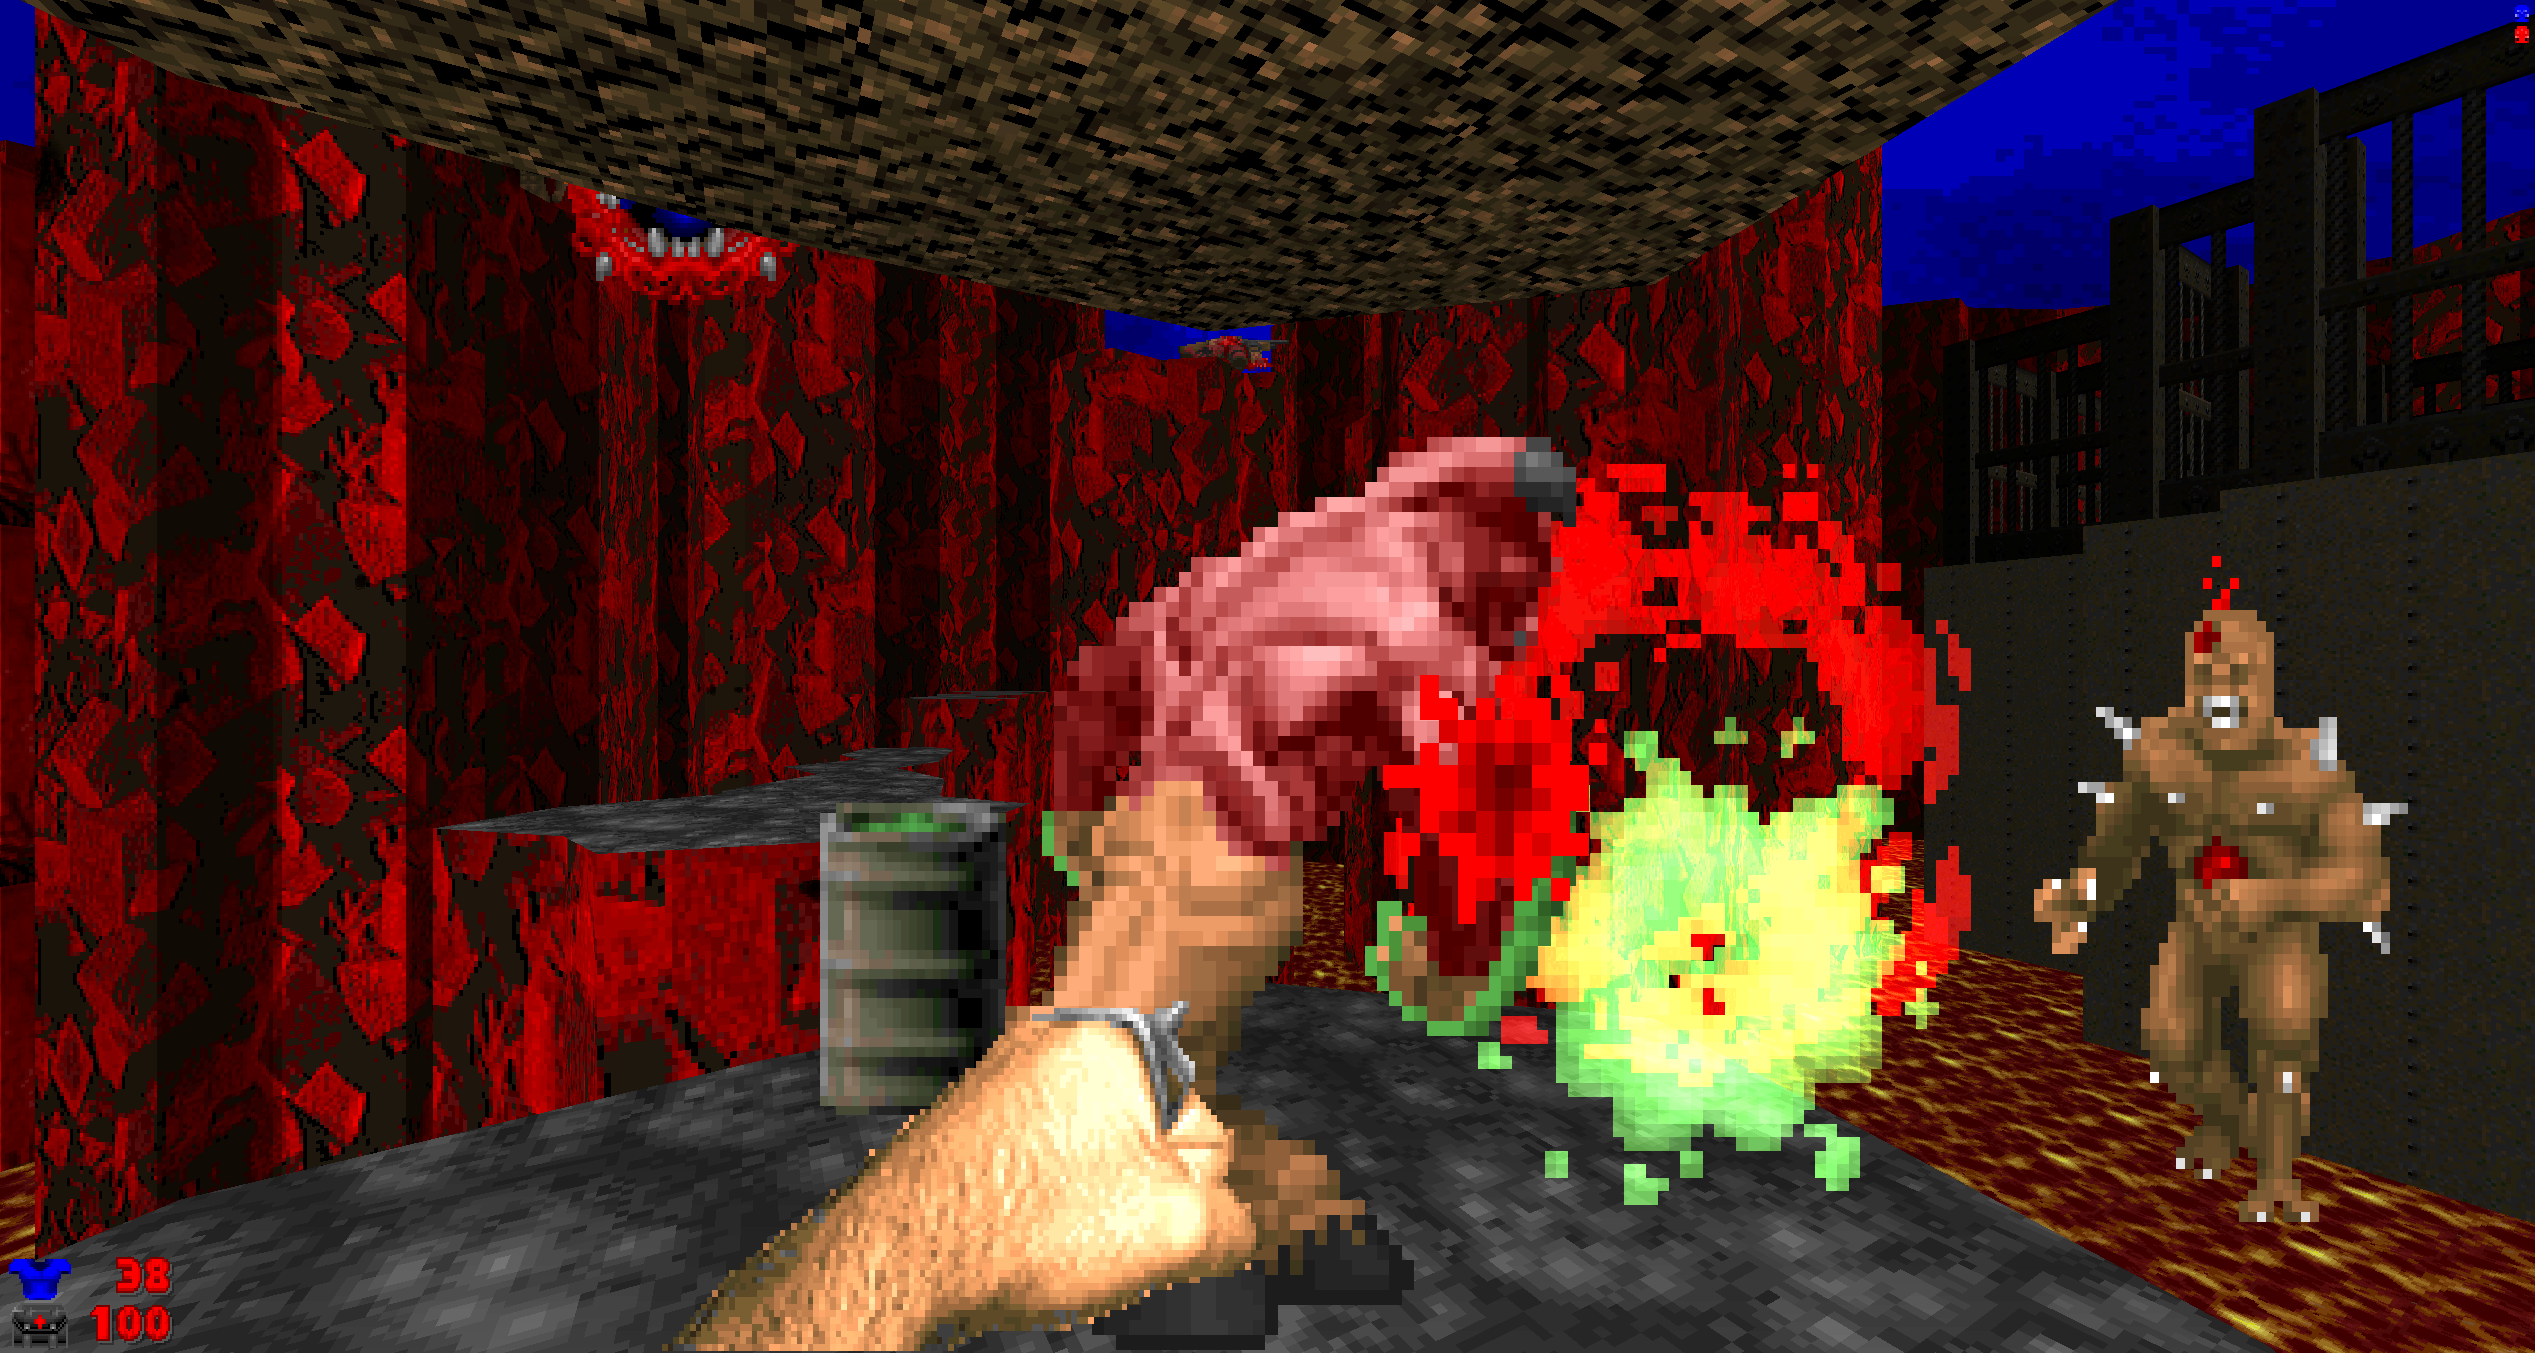 SIGIL II, Doom's sixth campaign episode, running on a modern PC gaming rig